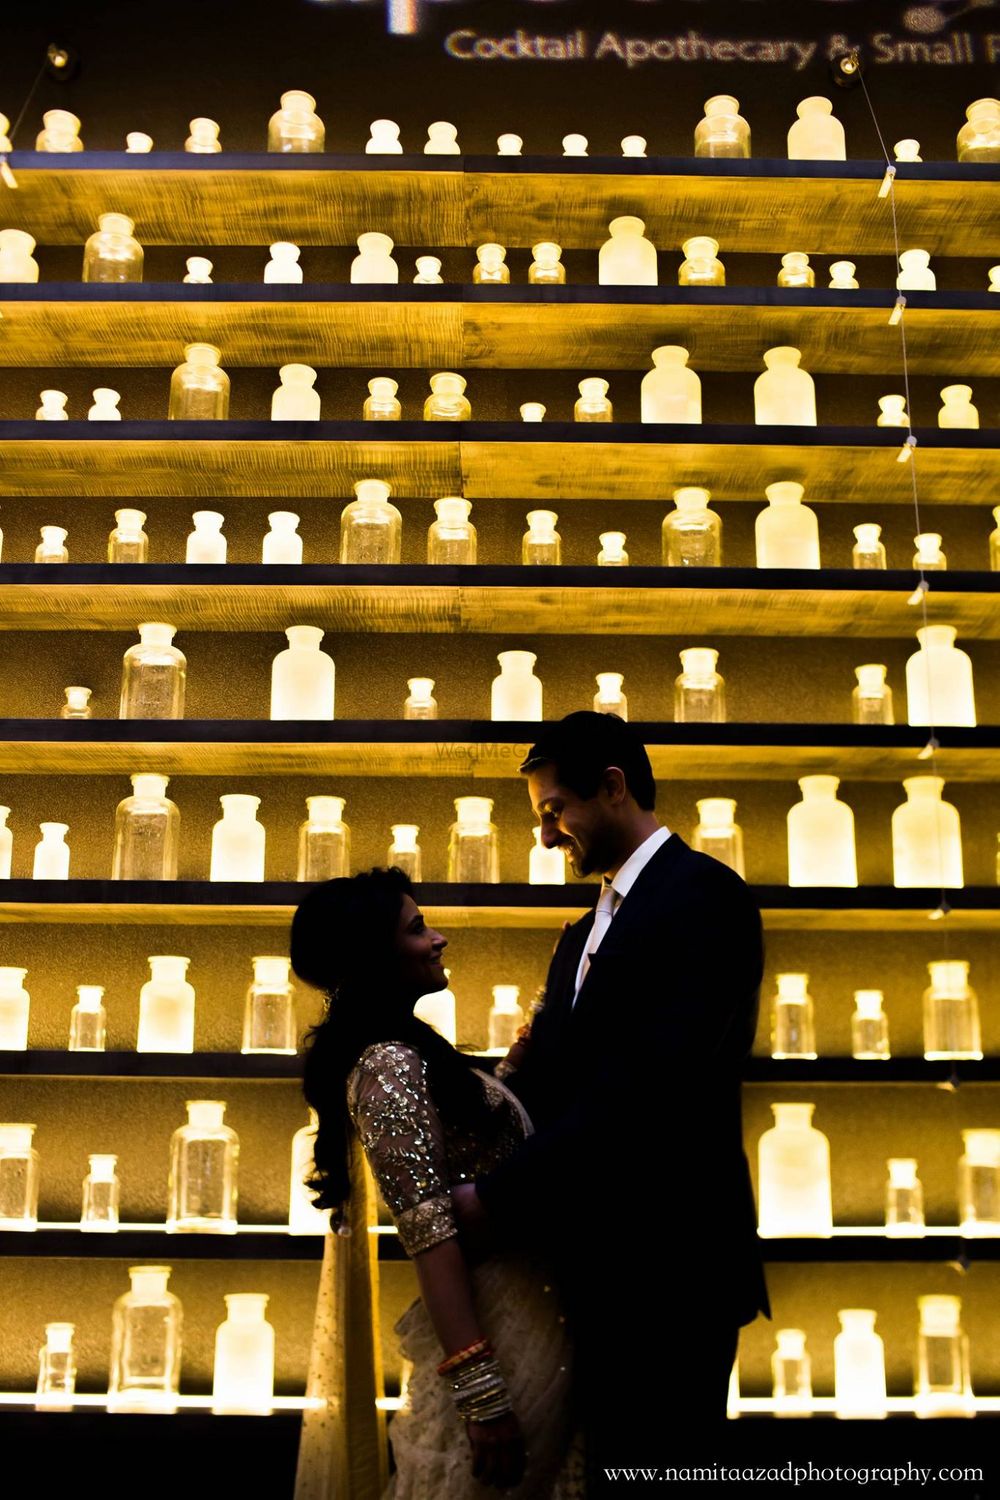 Photo of Unique Decor with Lights in Jars on Shelves